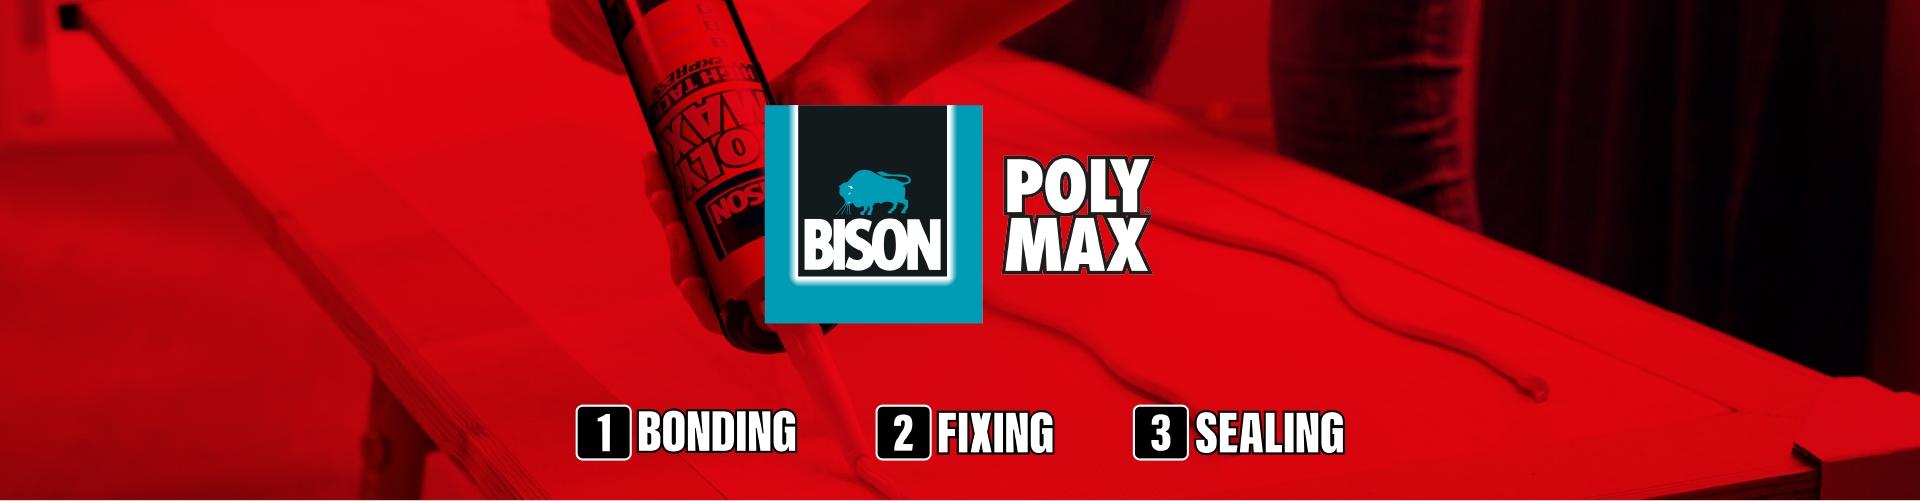 Poly Max from Bison Banner.